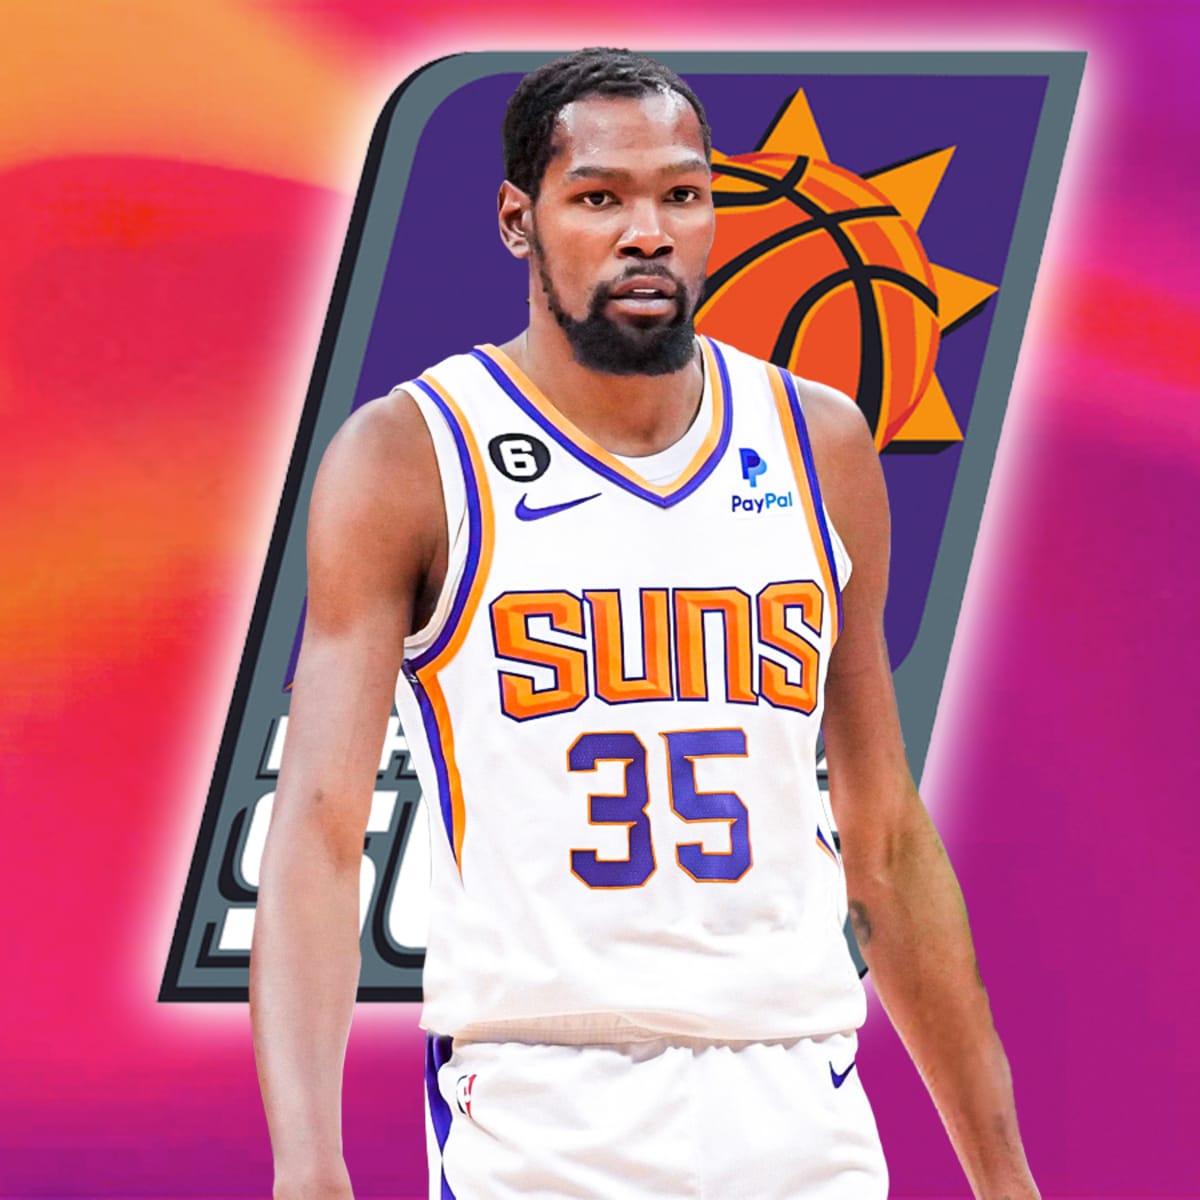 KEVIN DURANT IS A PHOENIX SUN @easymoneysniper, @Suns, #WeAreTheValley  This is my first attempt at a jersey swap. Still learning a…